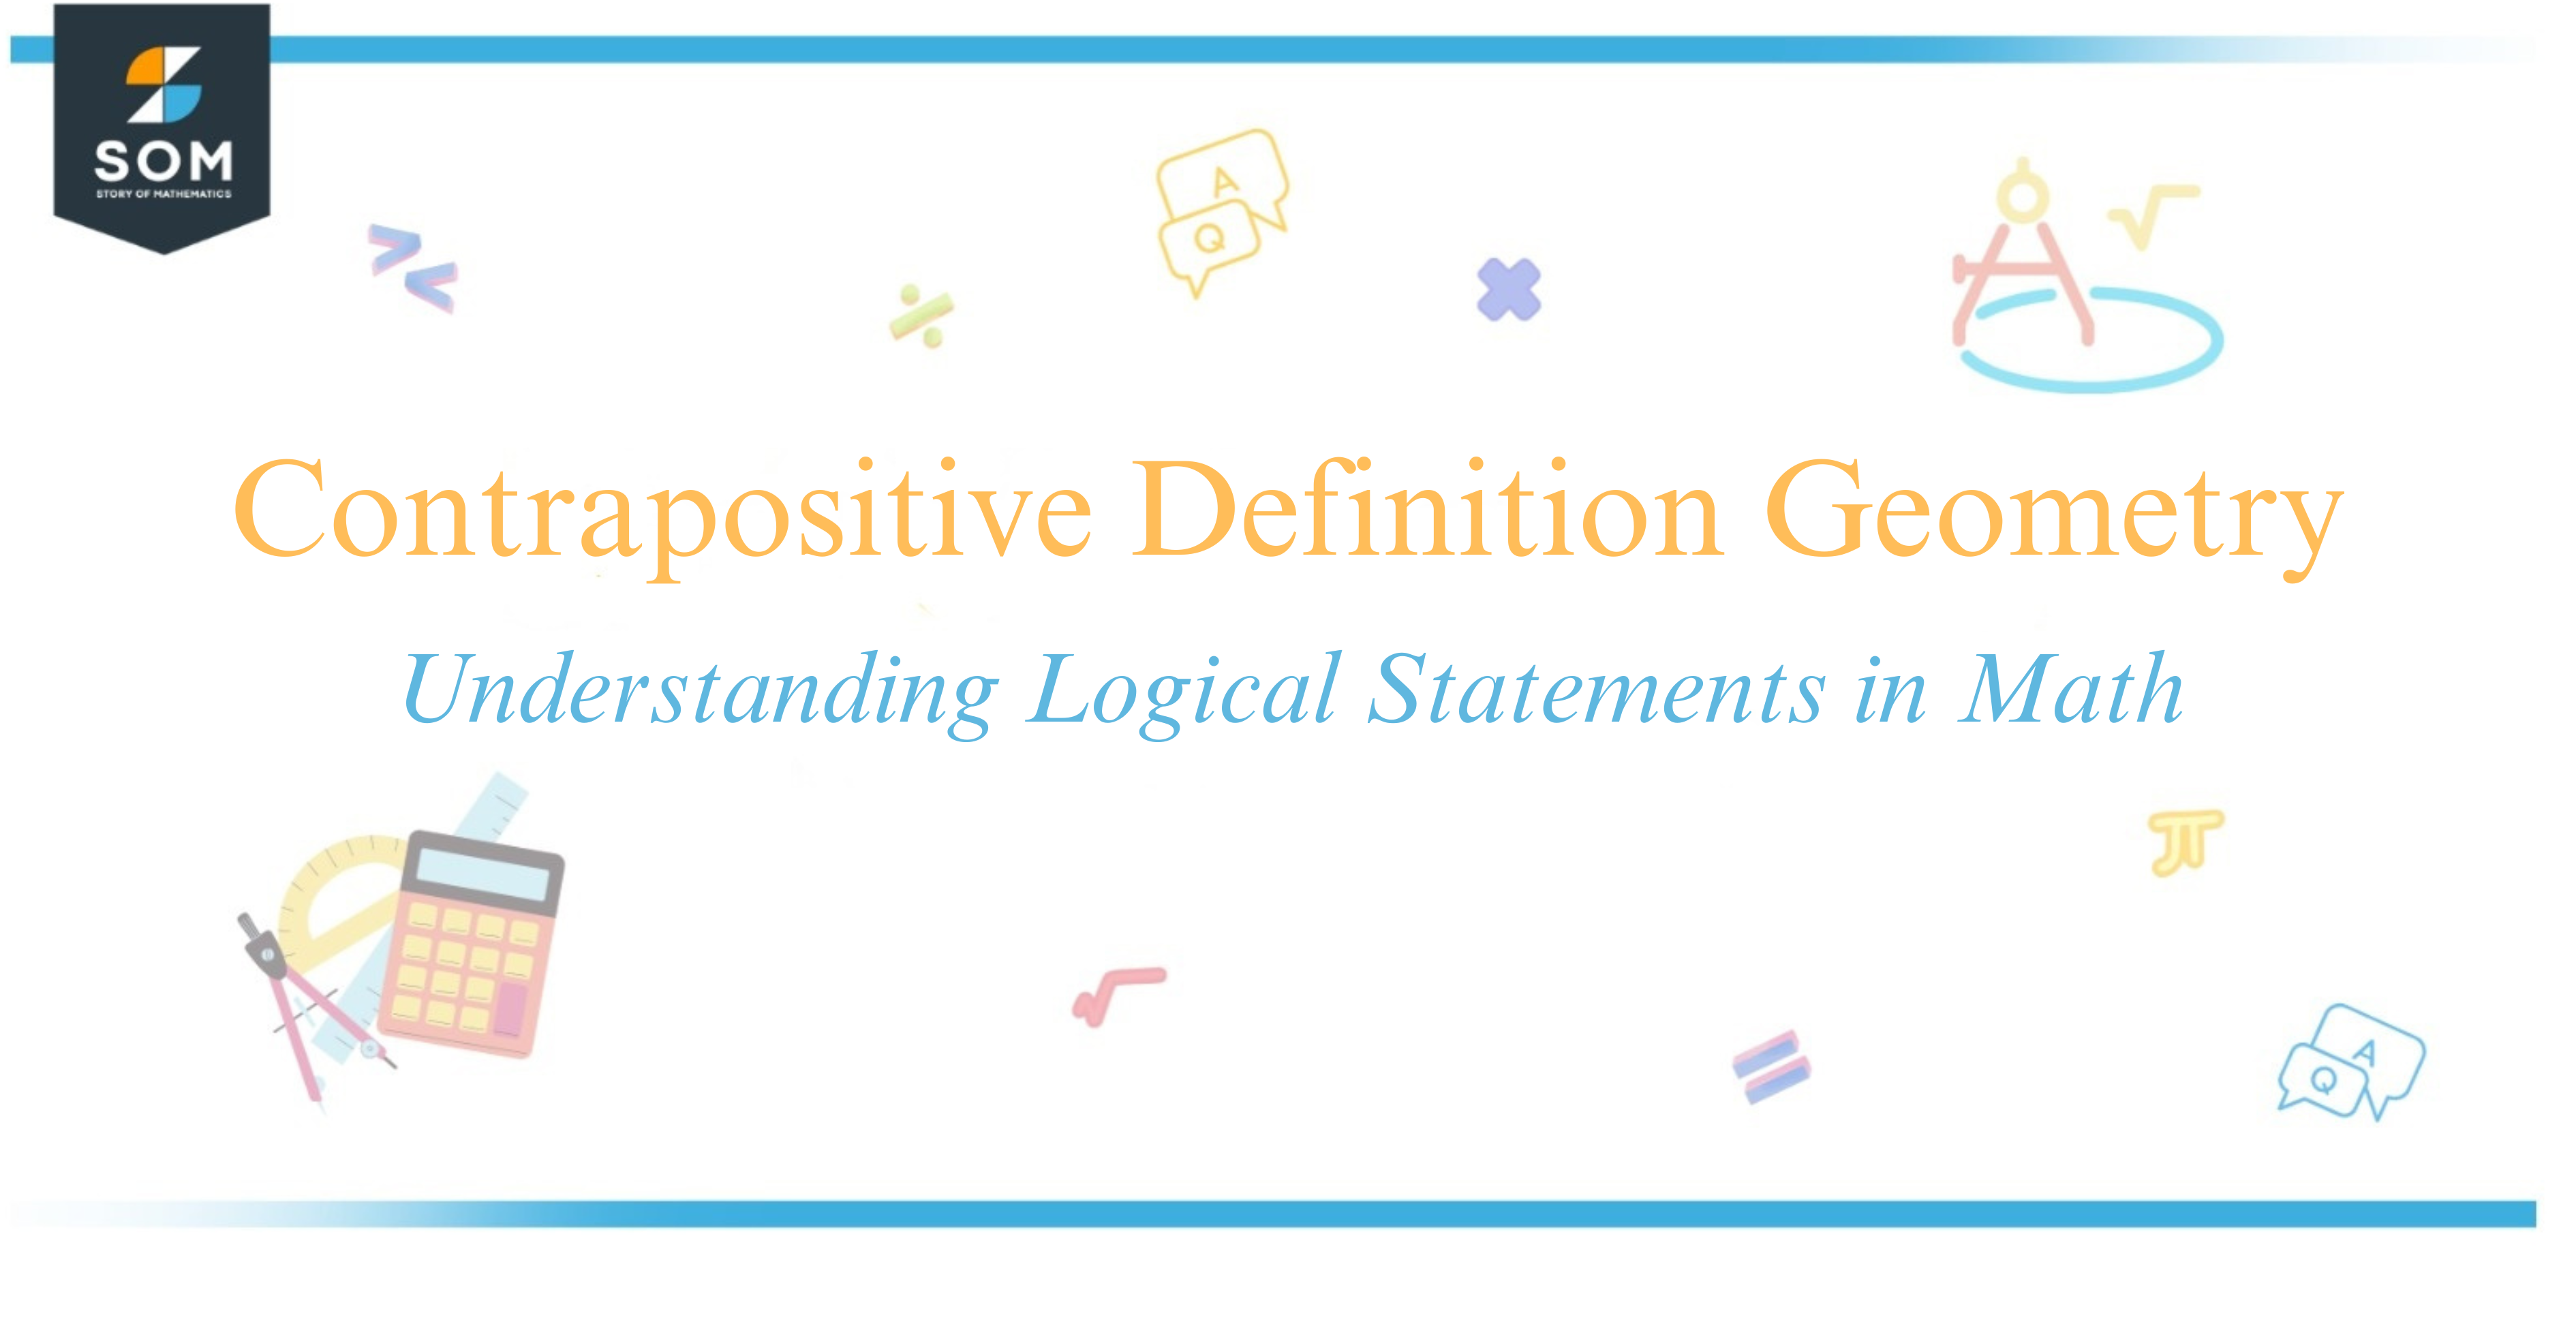 Contrapositive Definition Geometry Understanding Logical Statements in Math